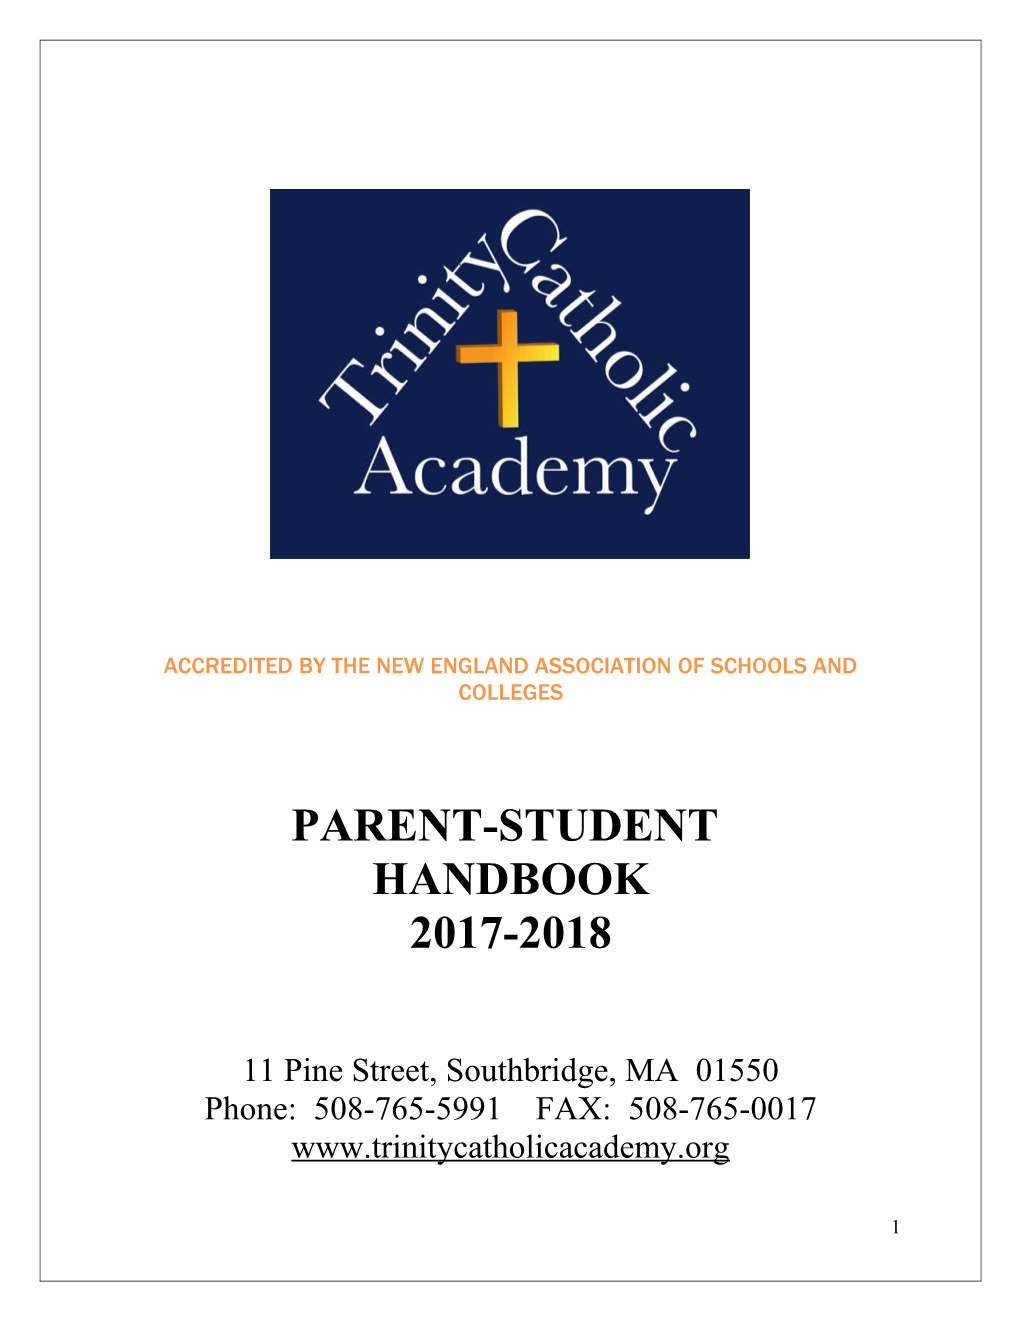 Accredited by the New England Association of Schools and Colleges